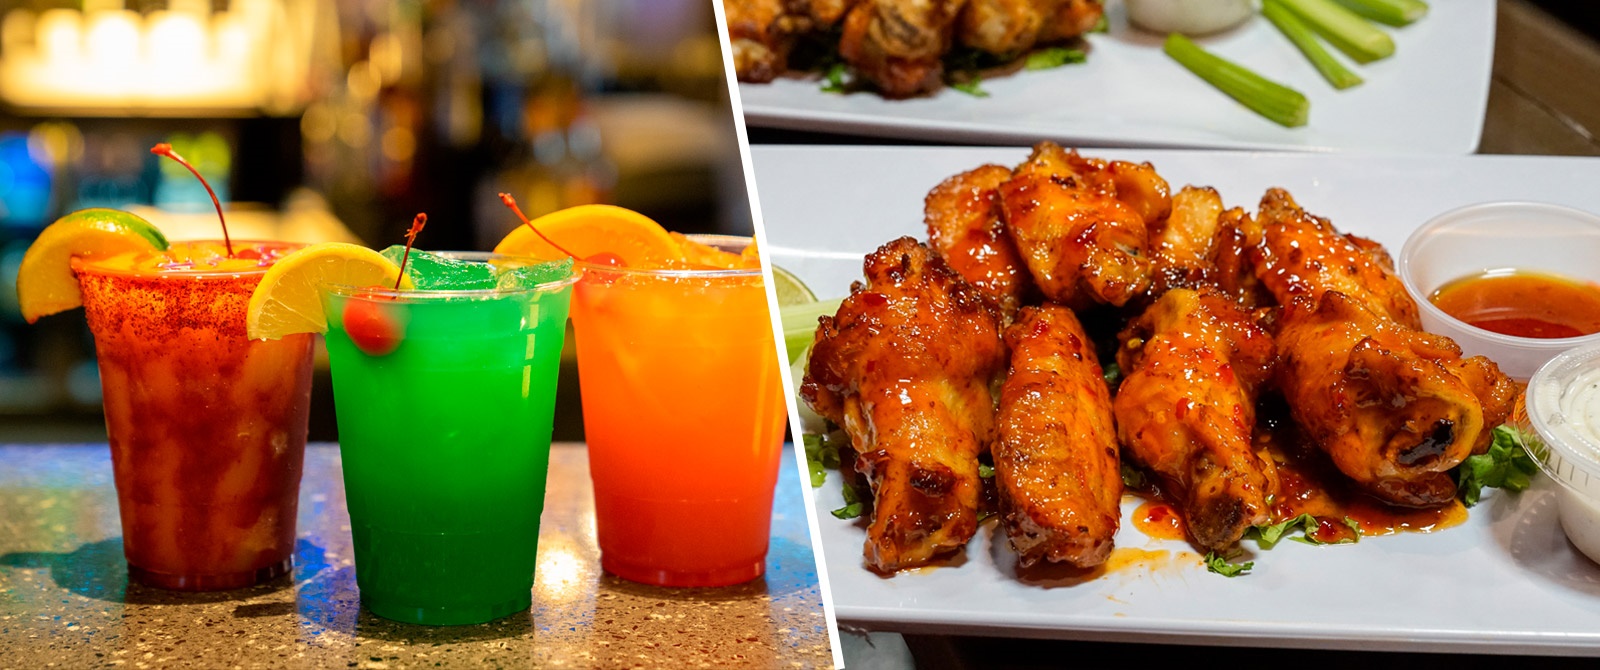 3 cocktails and a plate of chicken wings 